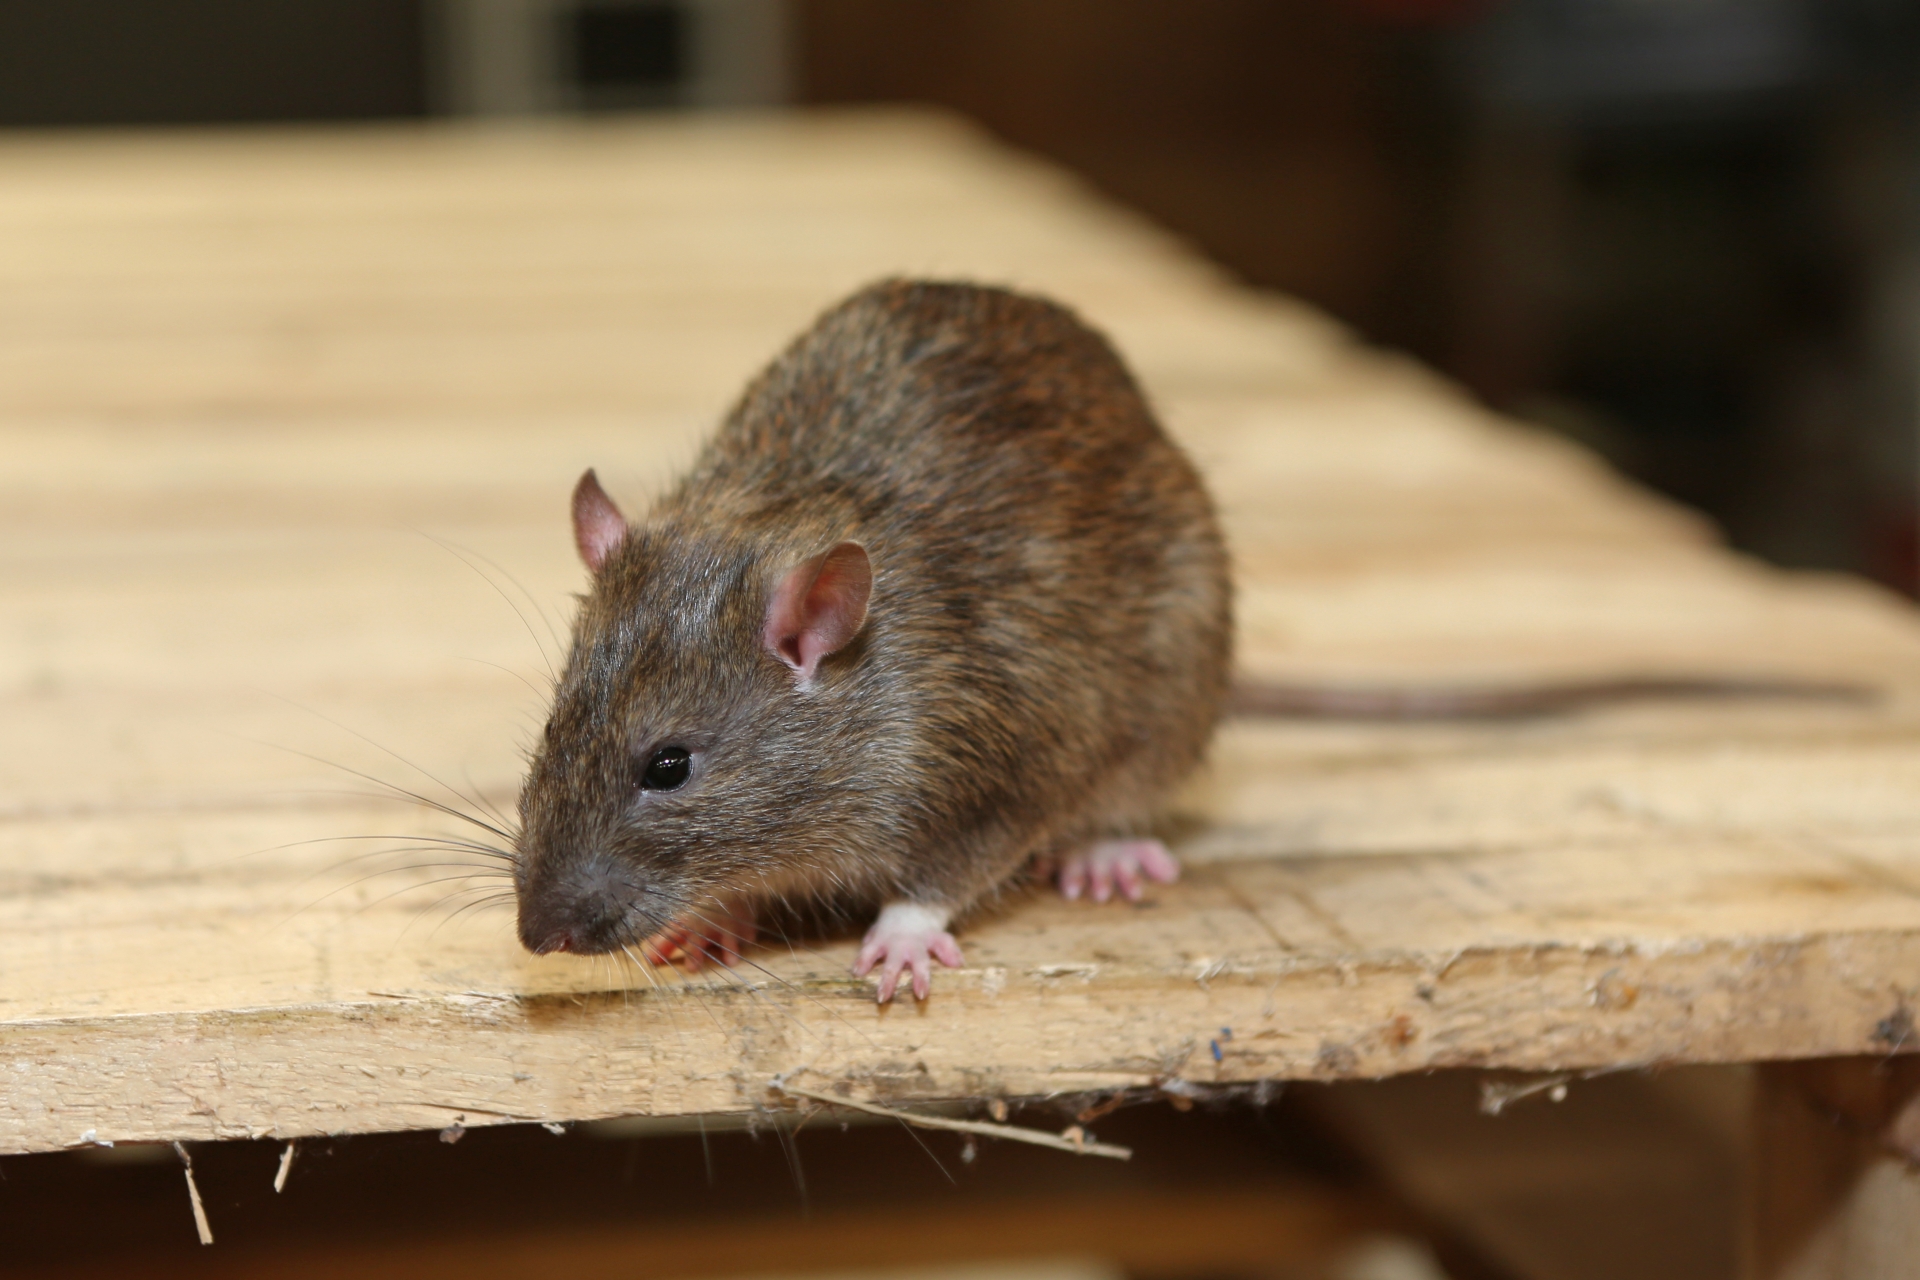 Rat Infestation, Pest Control in Colindale, Kingsbury, NW9. Call Now 020 8166 9746